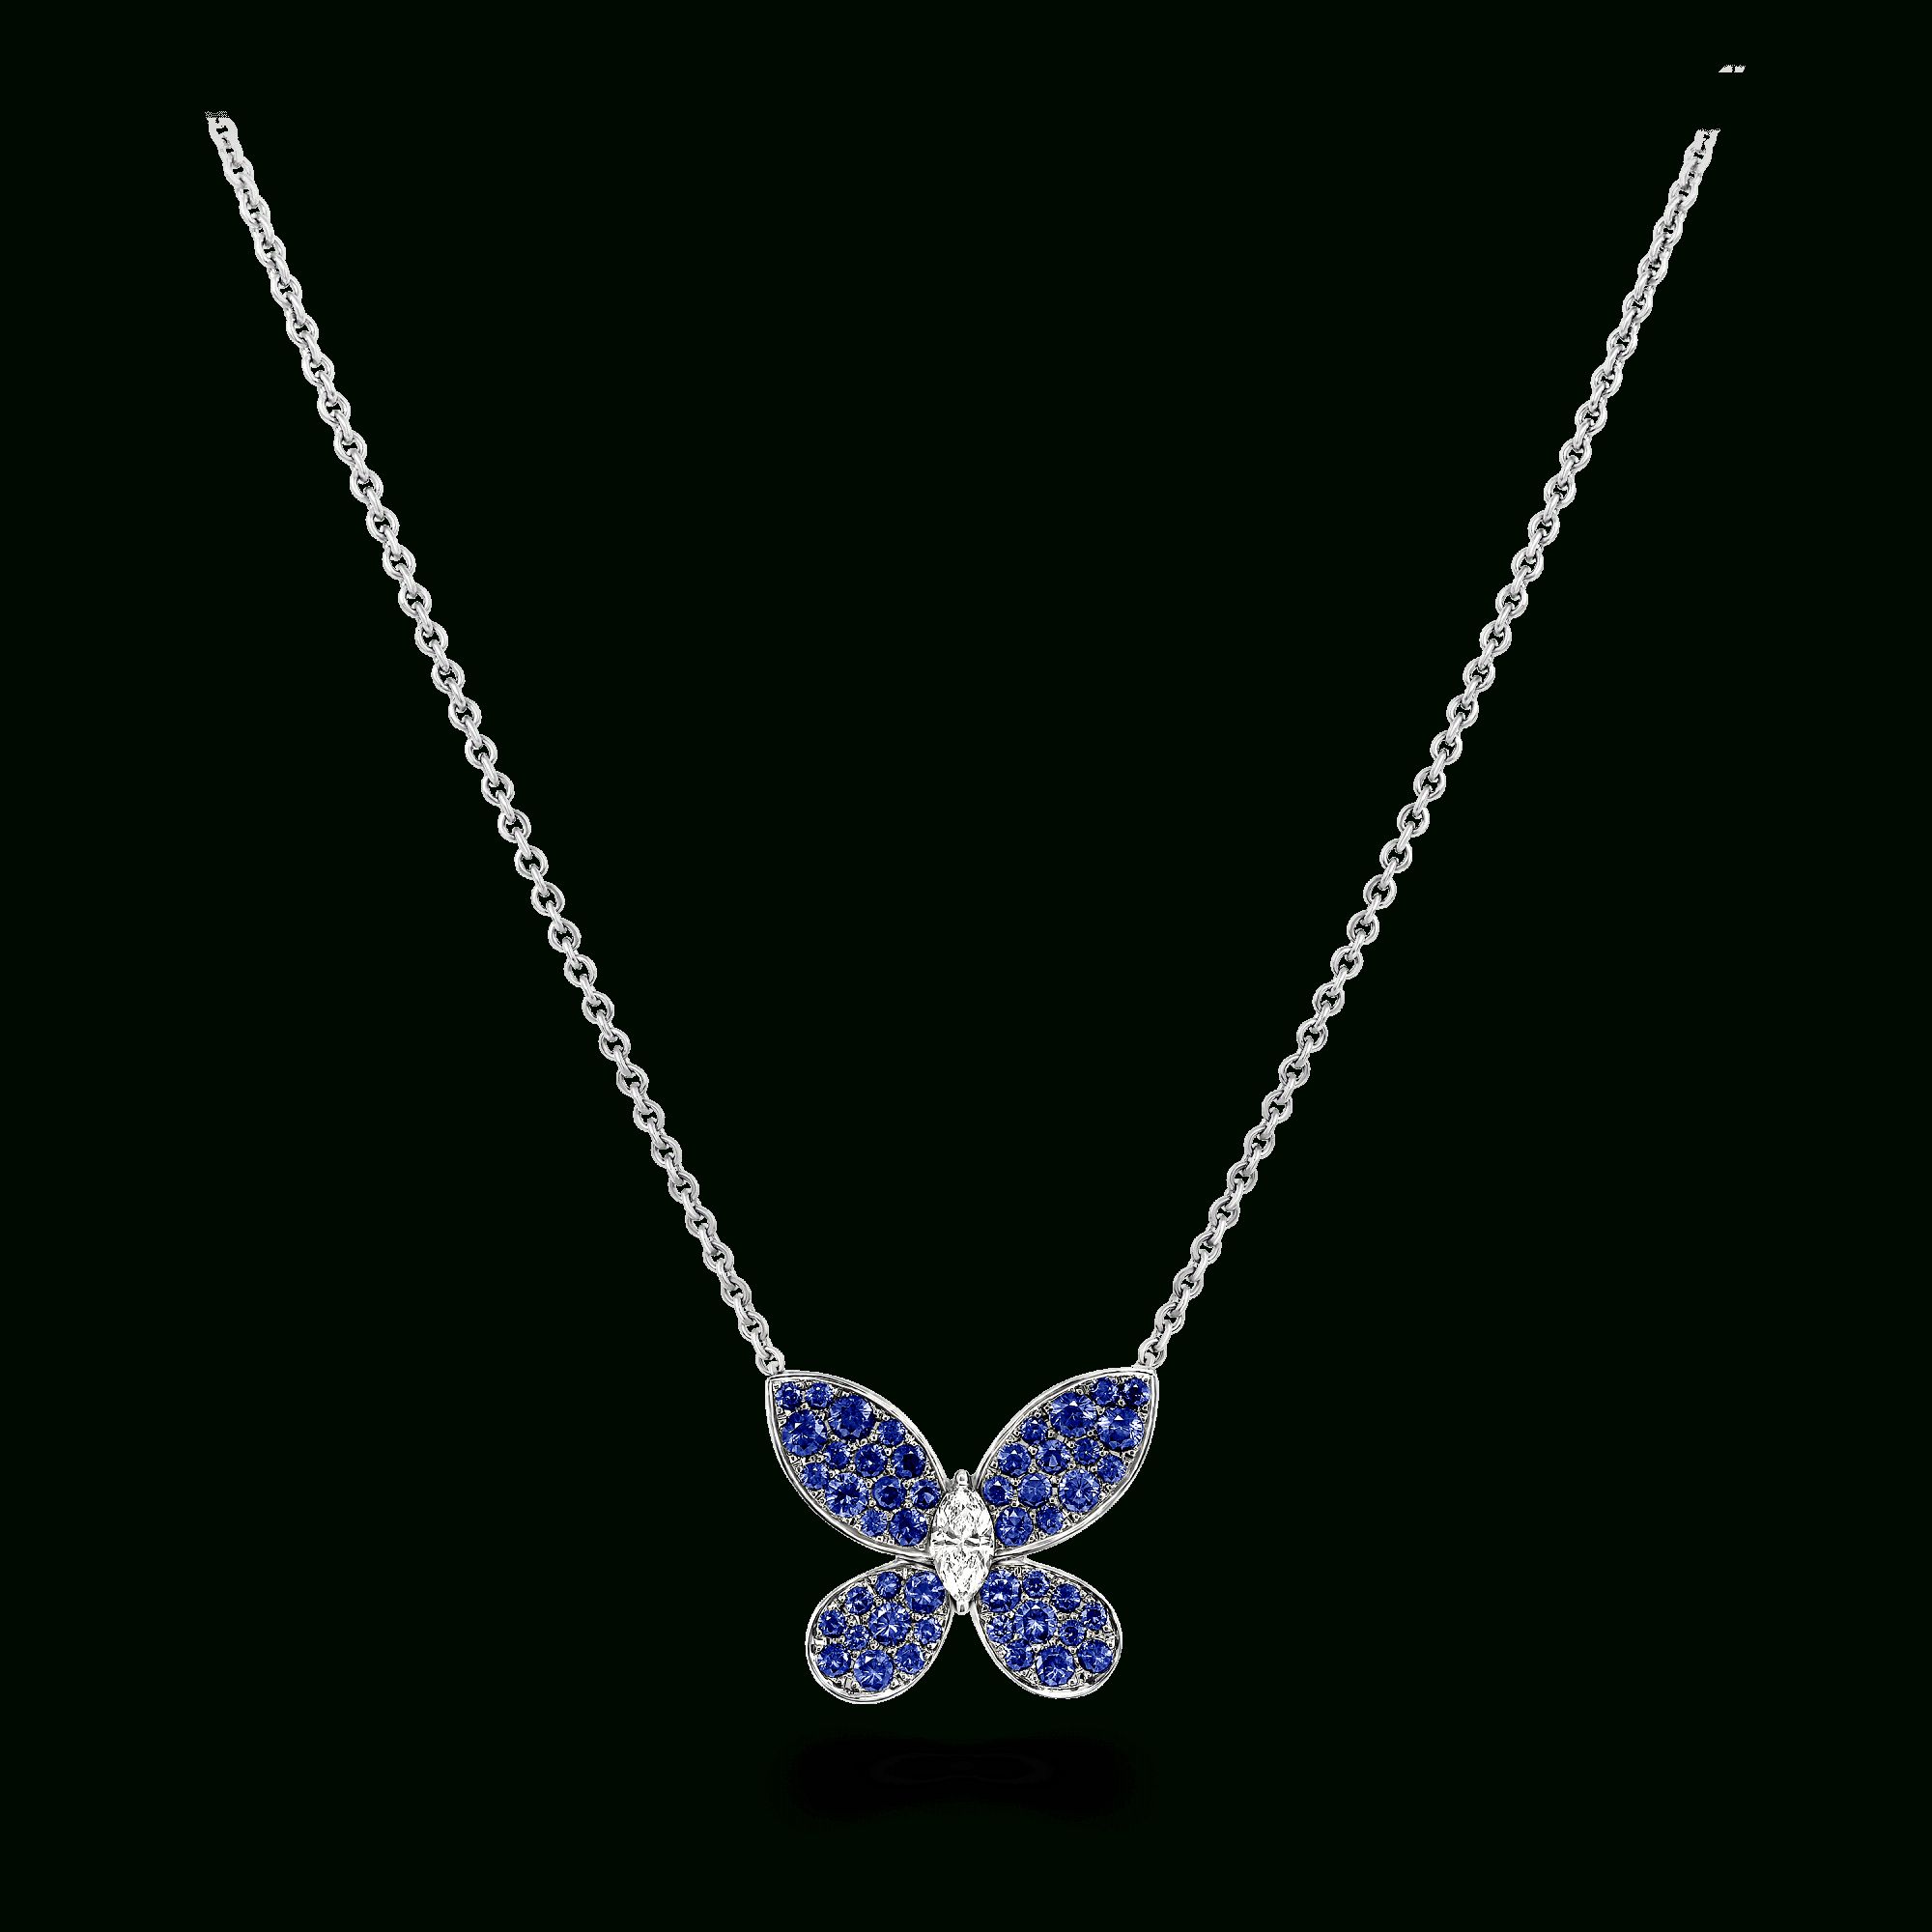 Pavé Butterfly Pendant, Sapphire And Diamond | Graff Within Current Pavé Butterfly Pendant Necklaces (View 5 of 25)